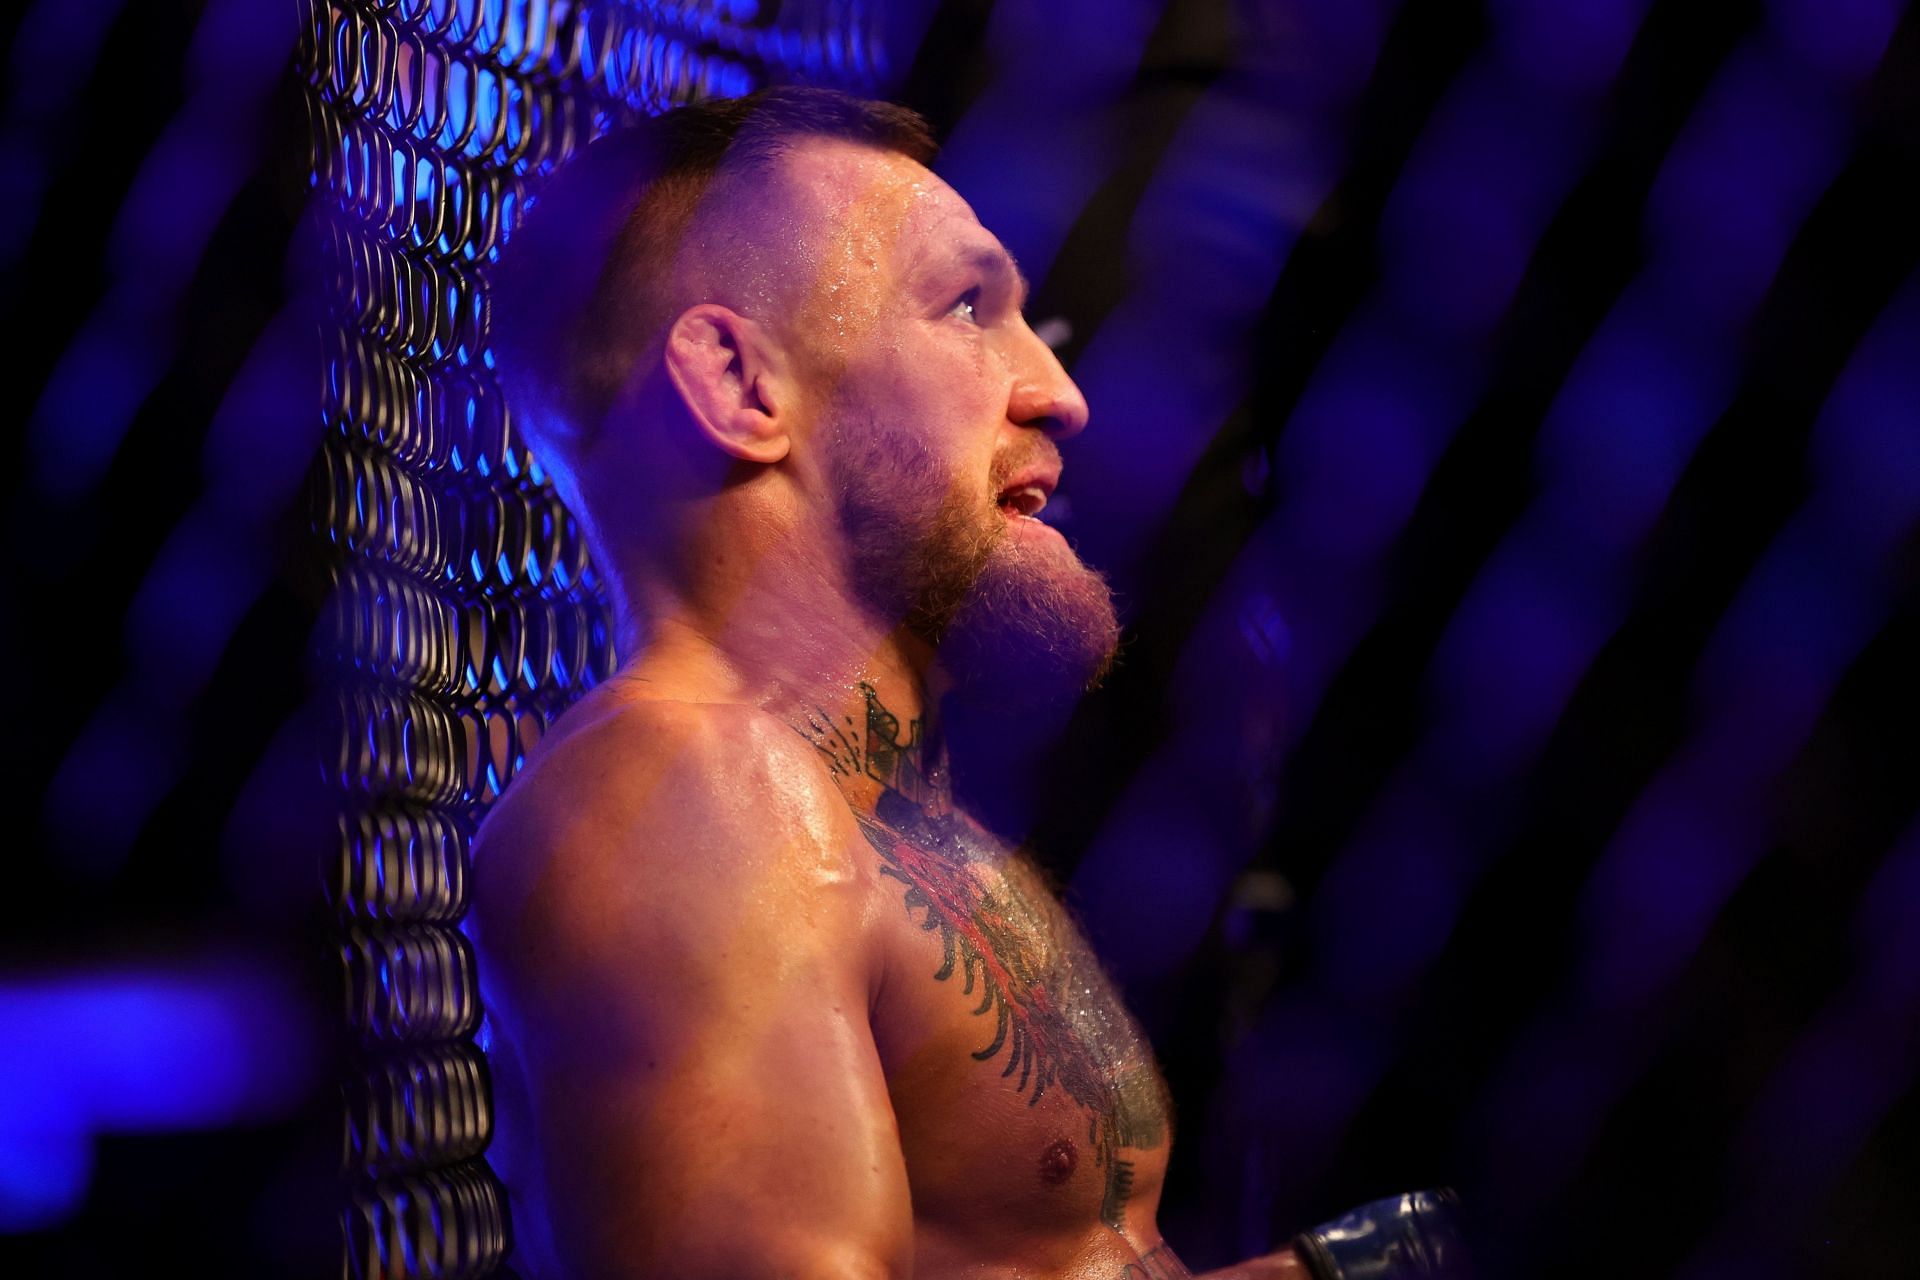 Conor McGregor awaits medical attention after his bout at UFC 264